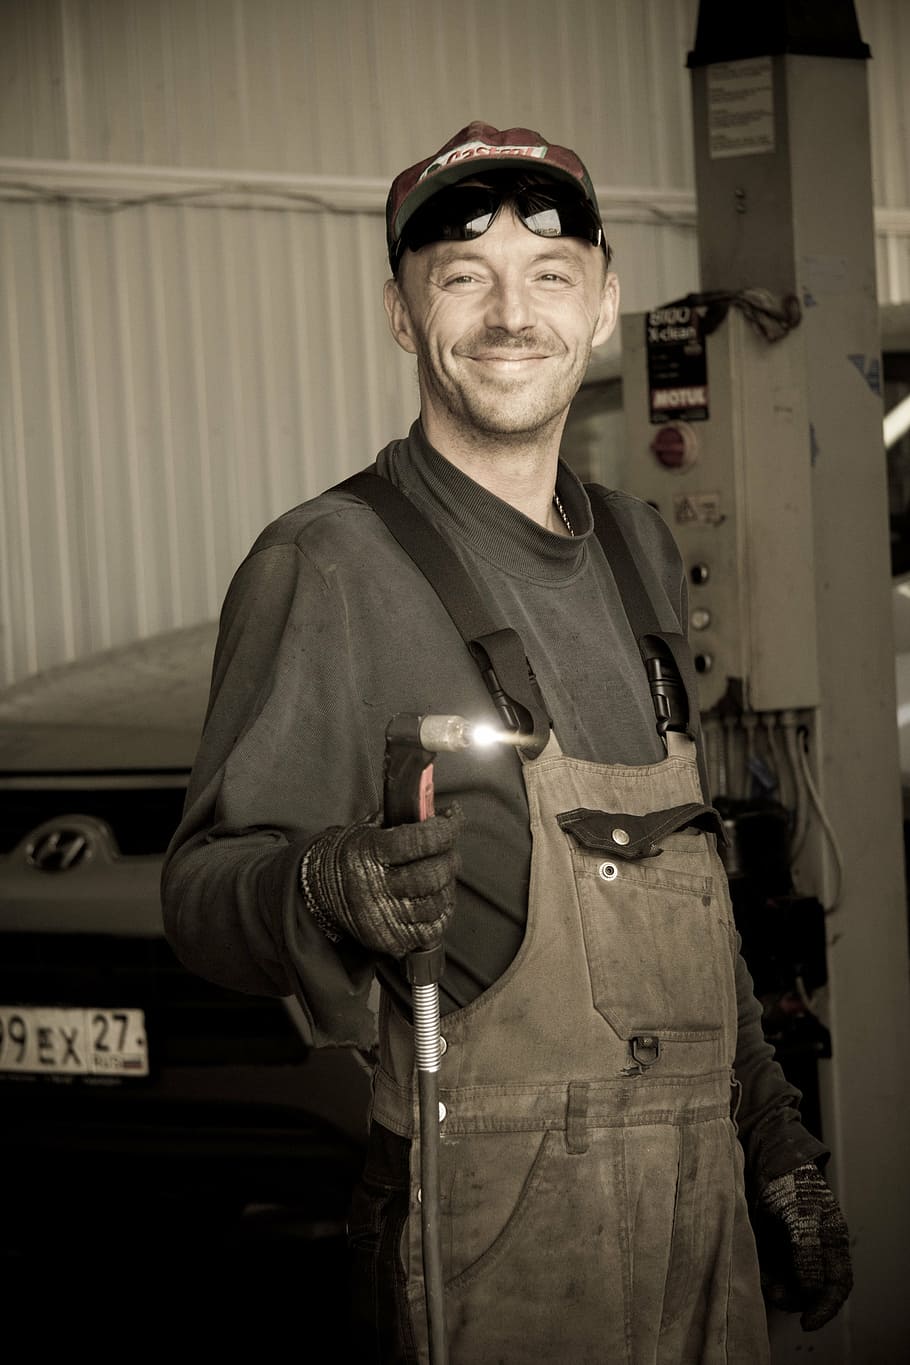 man, holding, welding torch, mechanic, plasmatic cutter, car service, looking at camera, standing, one person, portrait